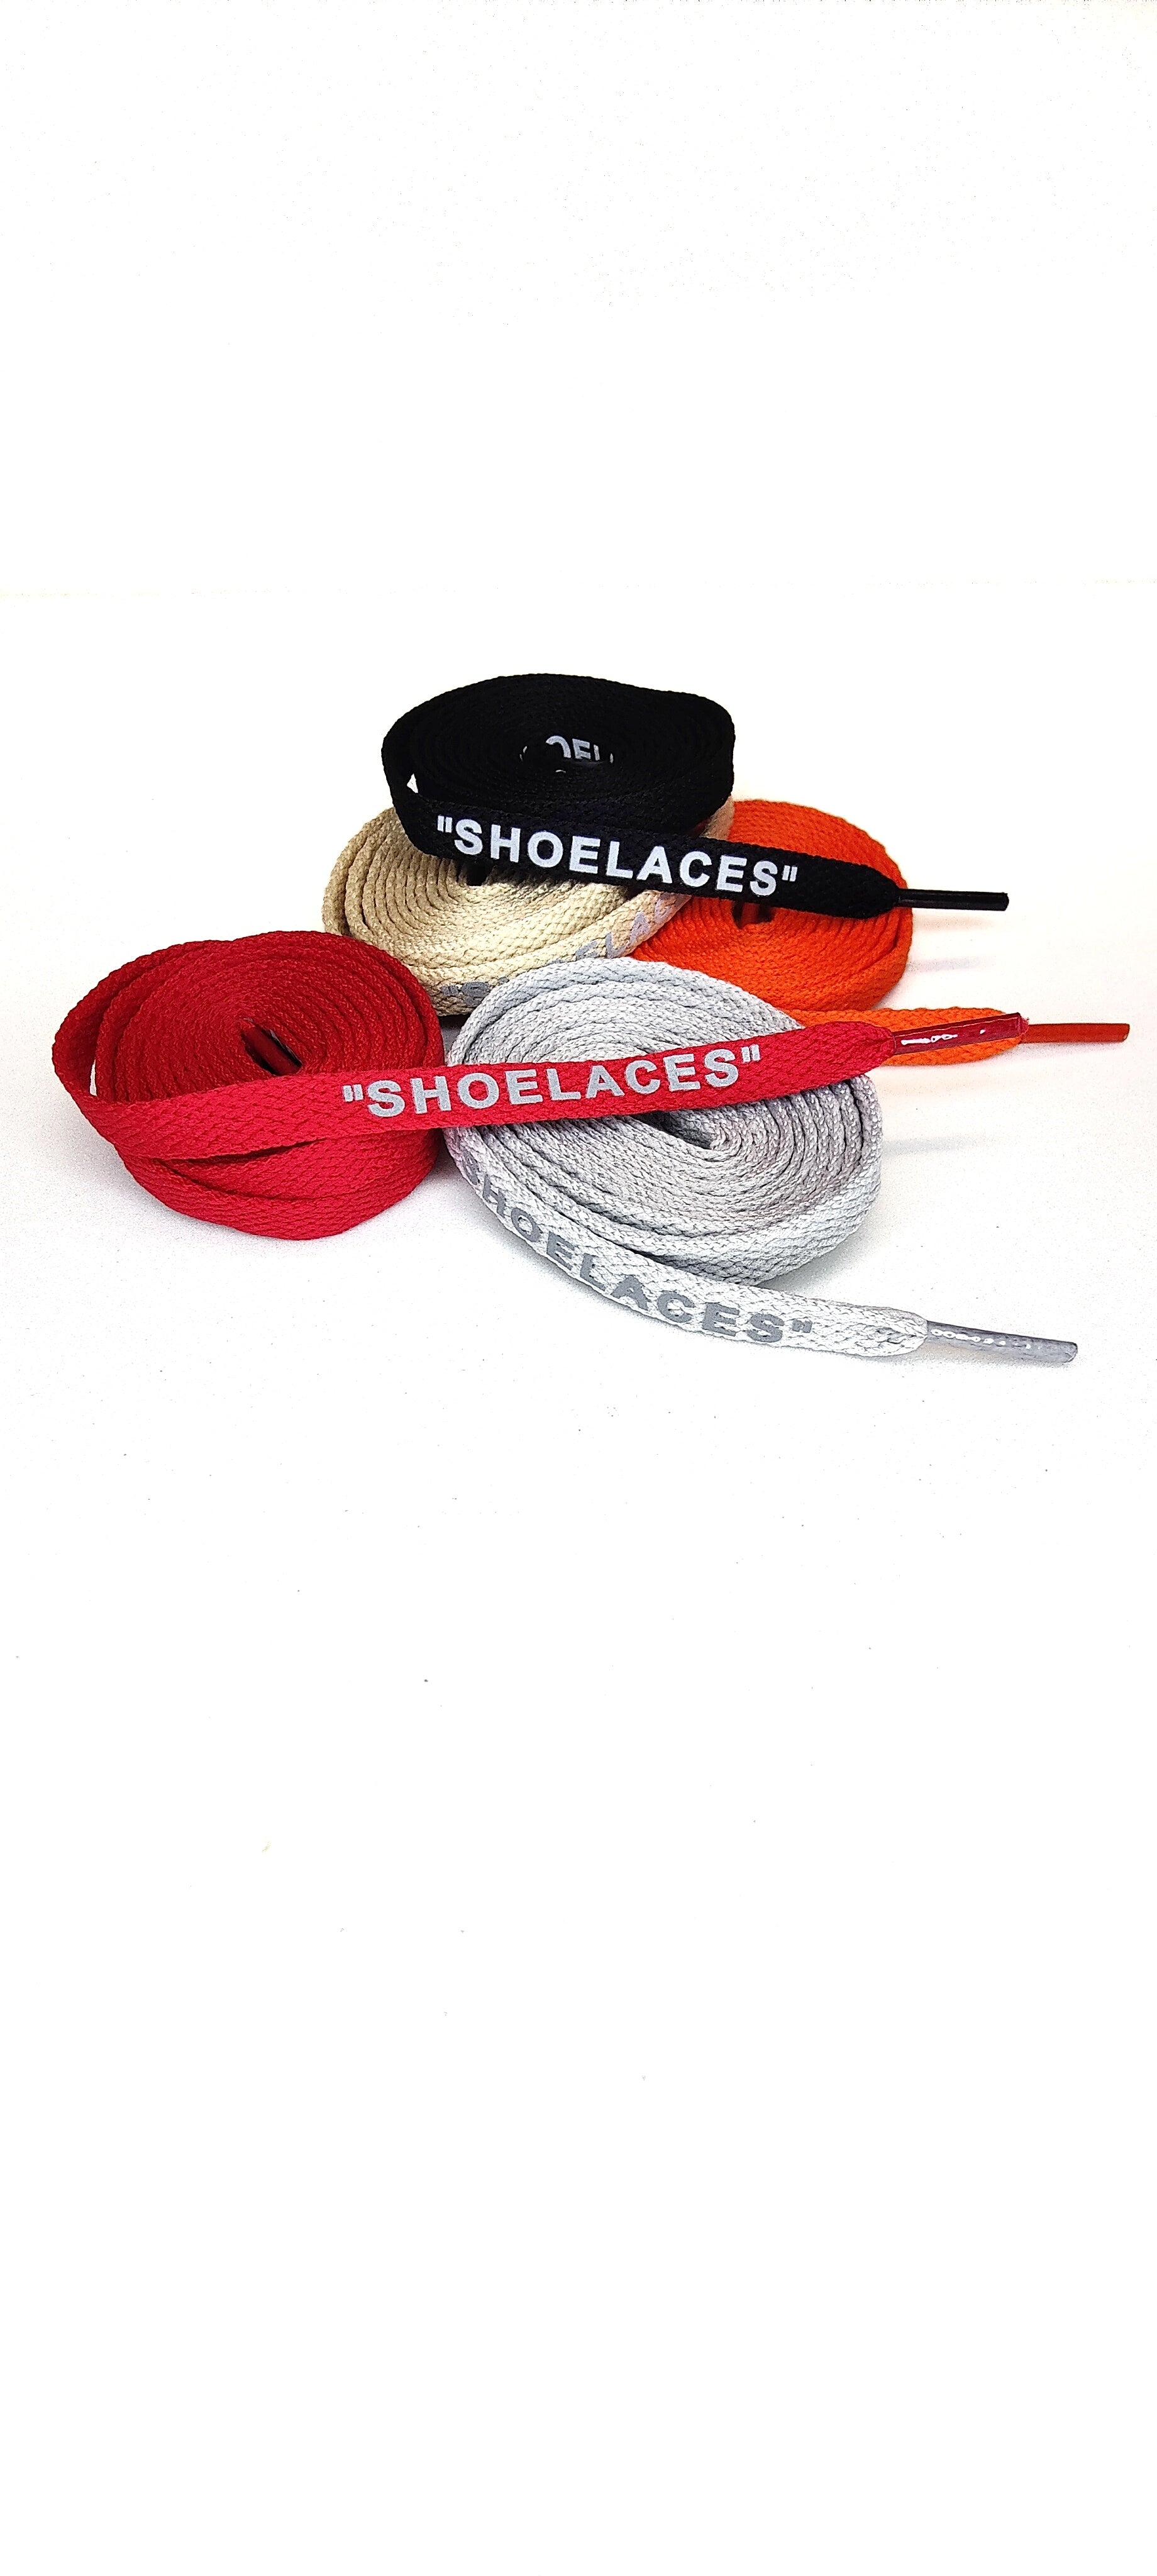 Off-White Style"Shoelace Reflective" 5 pairs Flat combo by TGLC